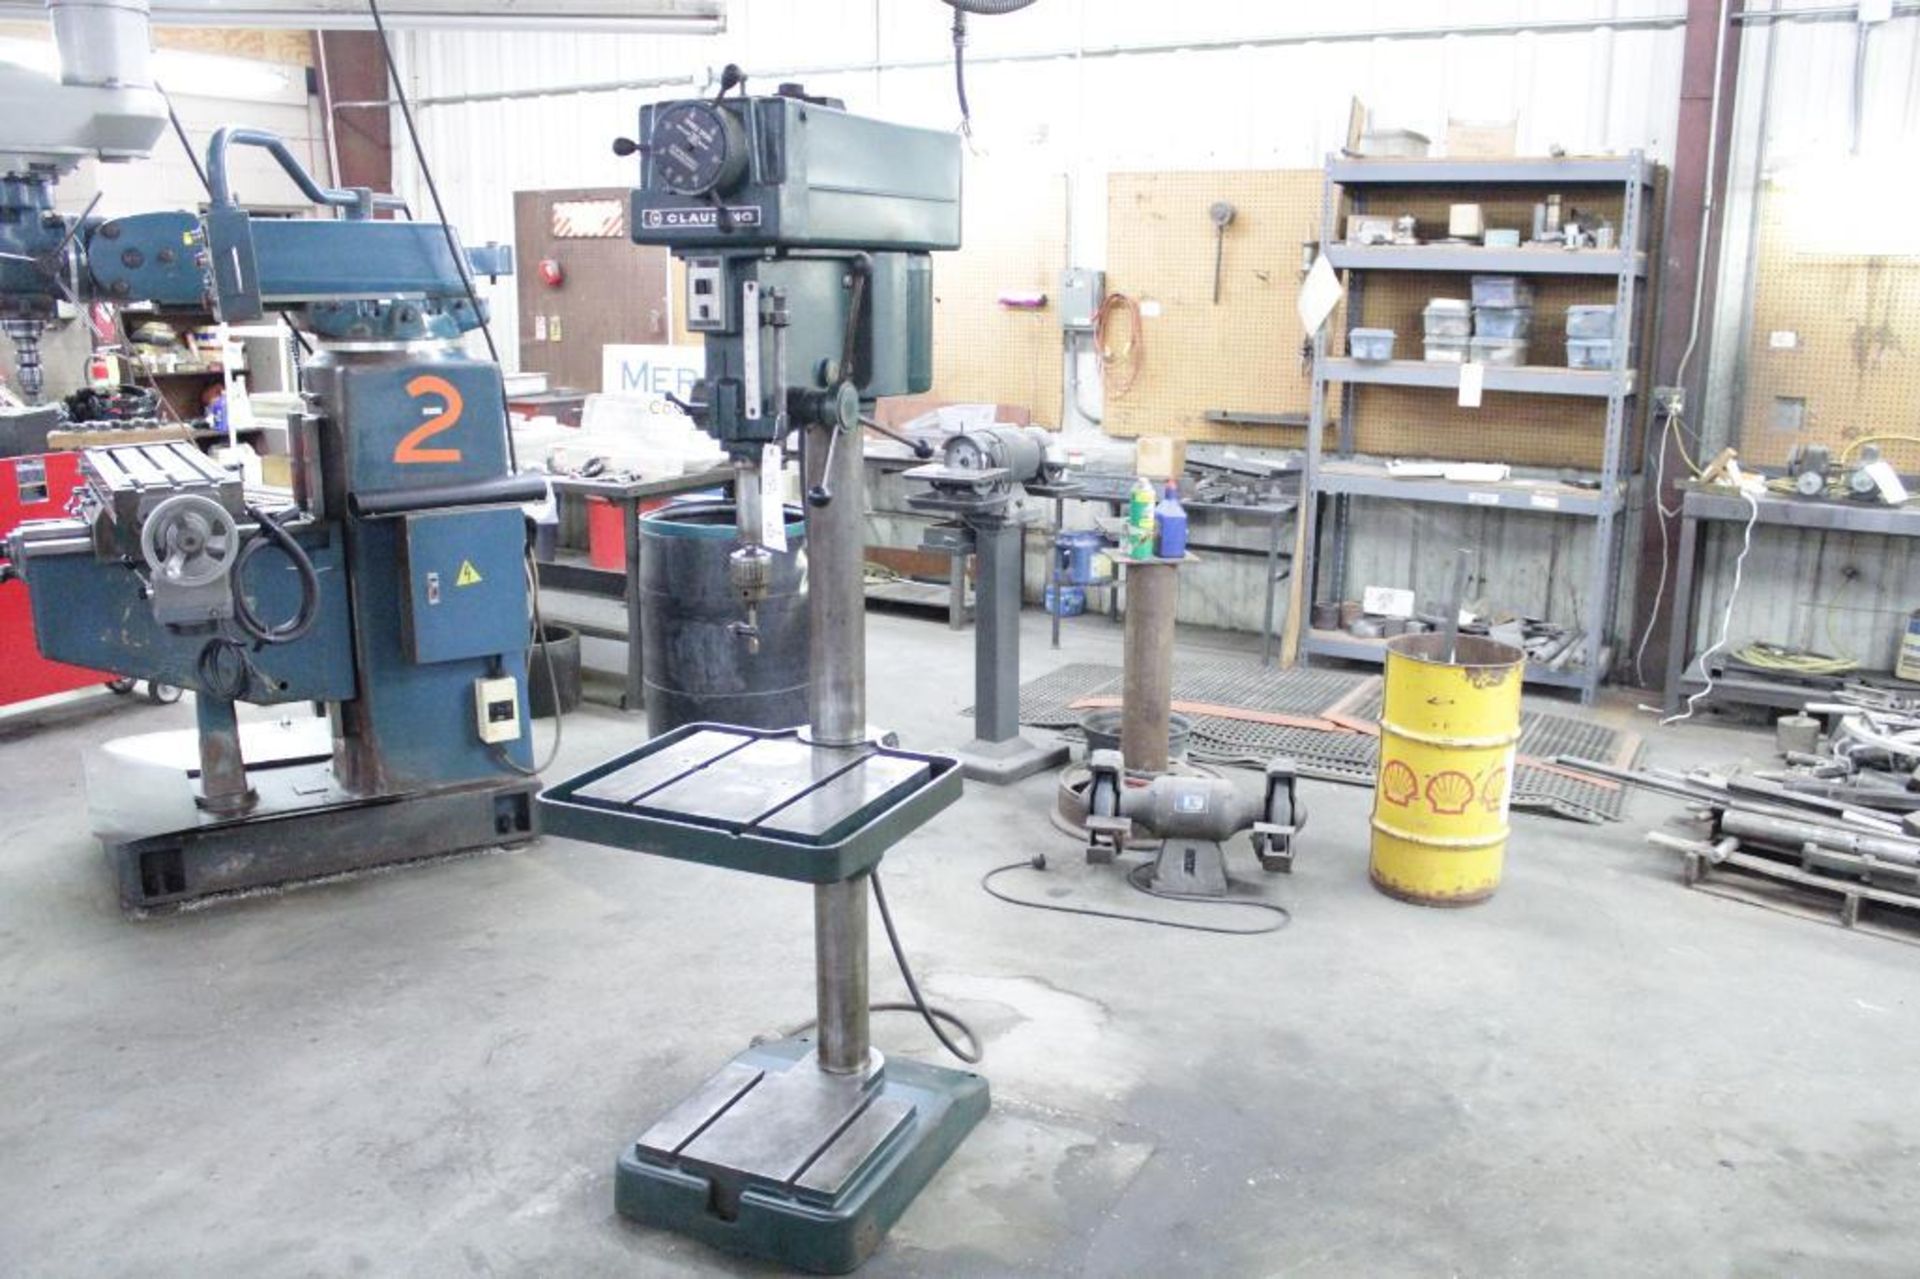 Clausing 2275 20" Variable Speed Drill Press